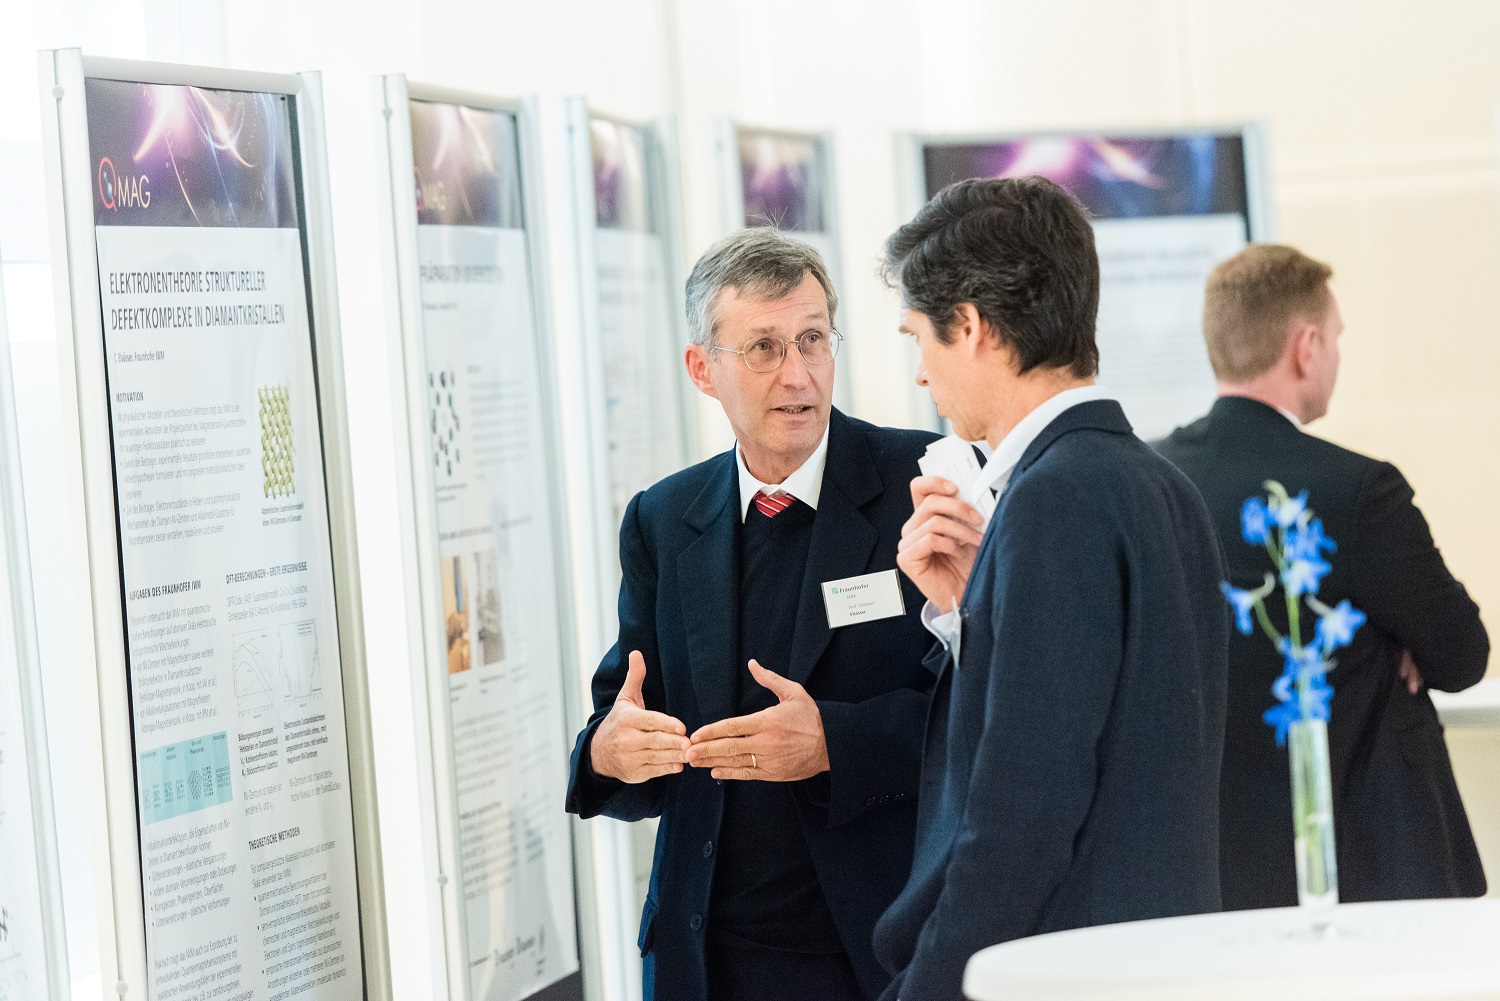 two men discuss during a poster presentation